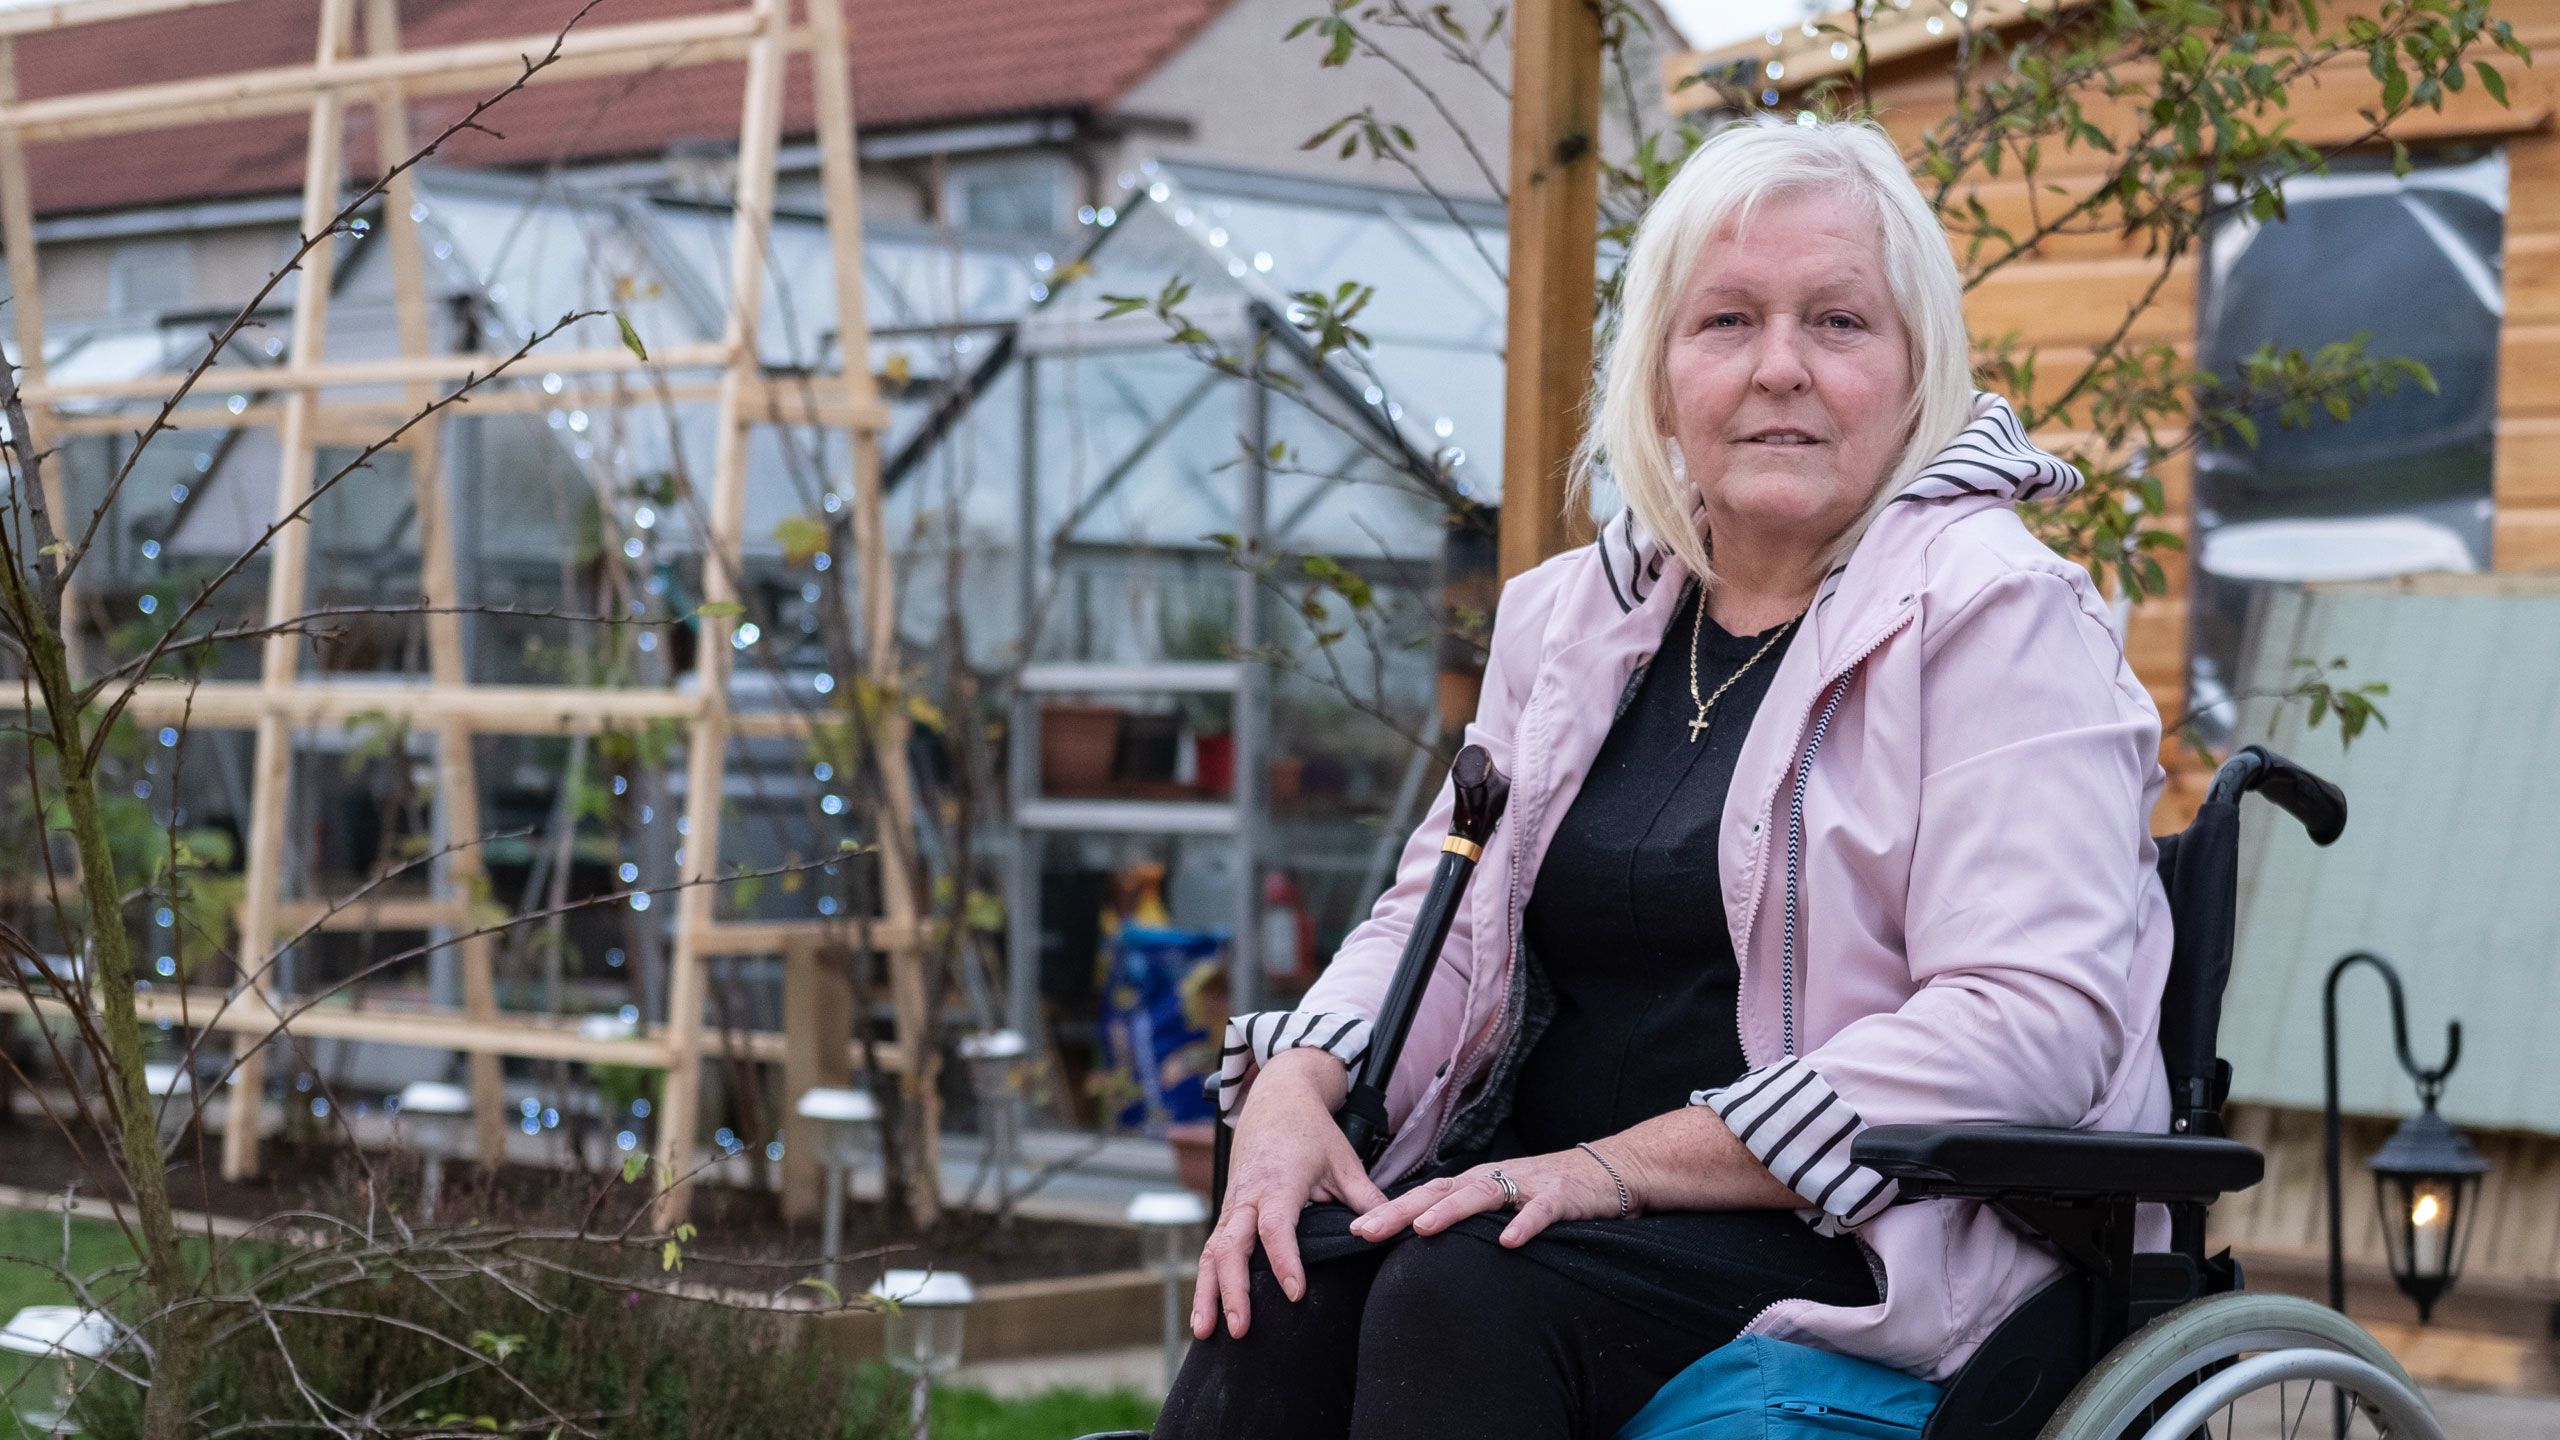 Kay Smith knows she will suffer as she dies. She wants the choice of assisted dying.